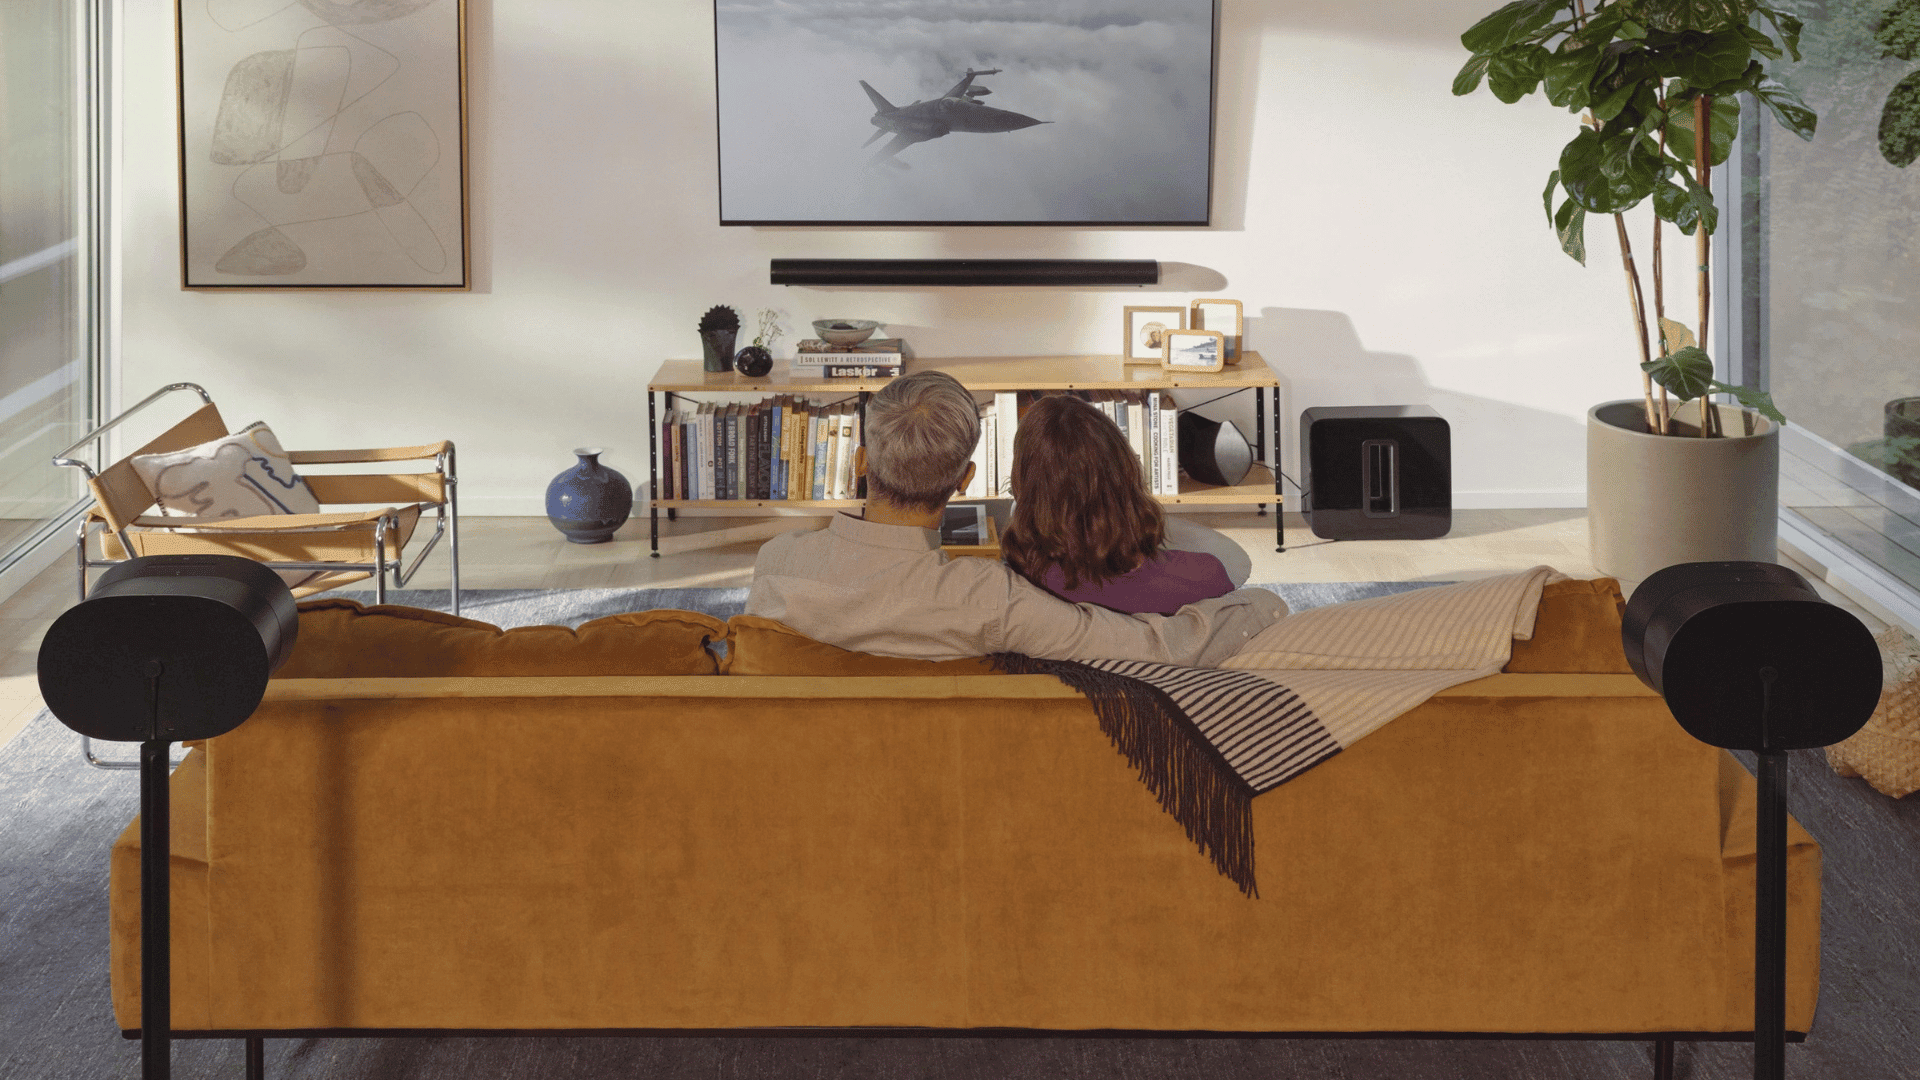 Sonos' spatial audio system in a living room